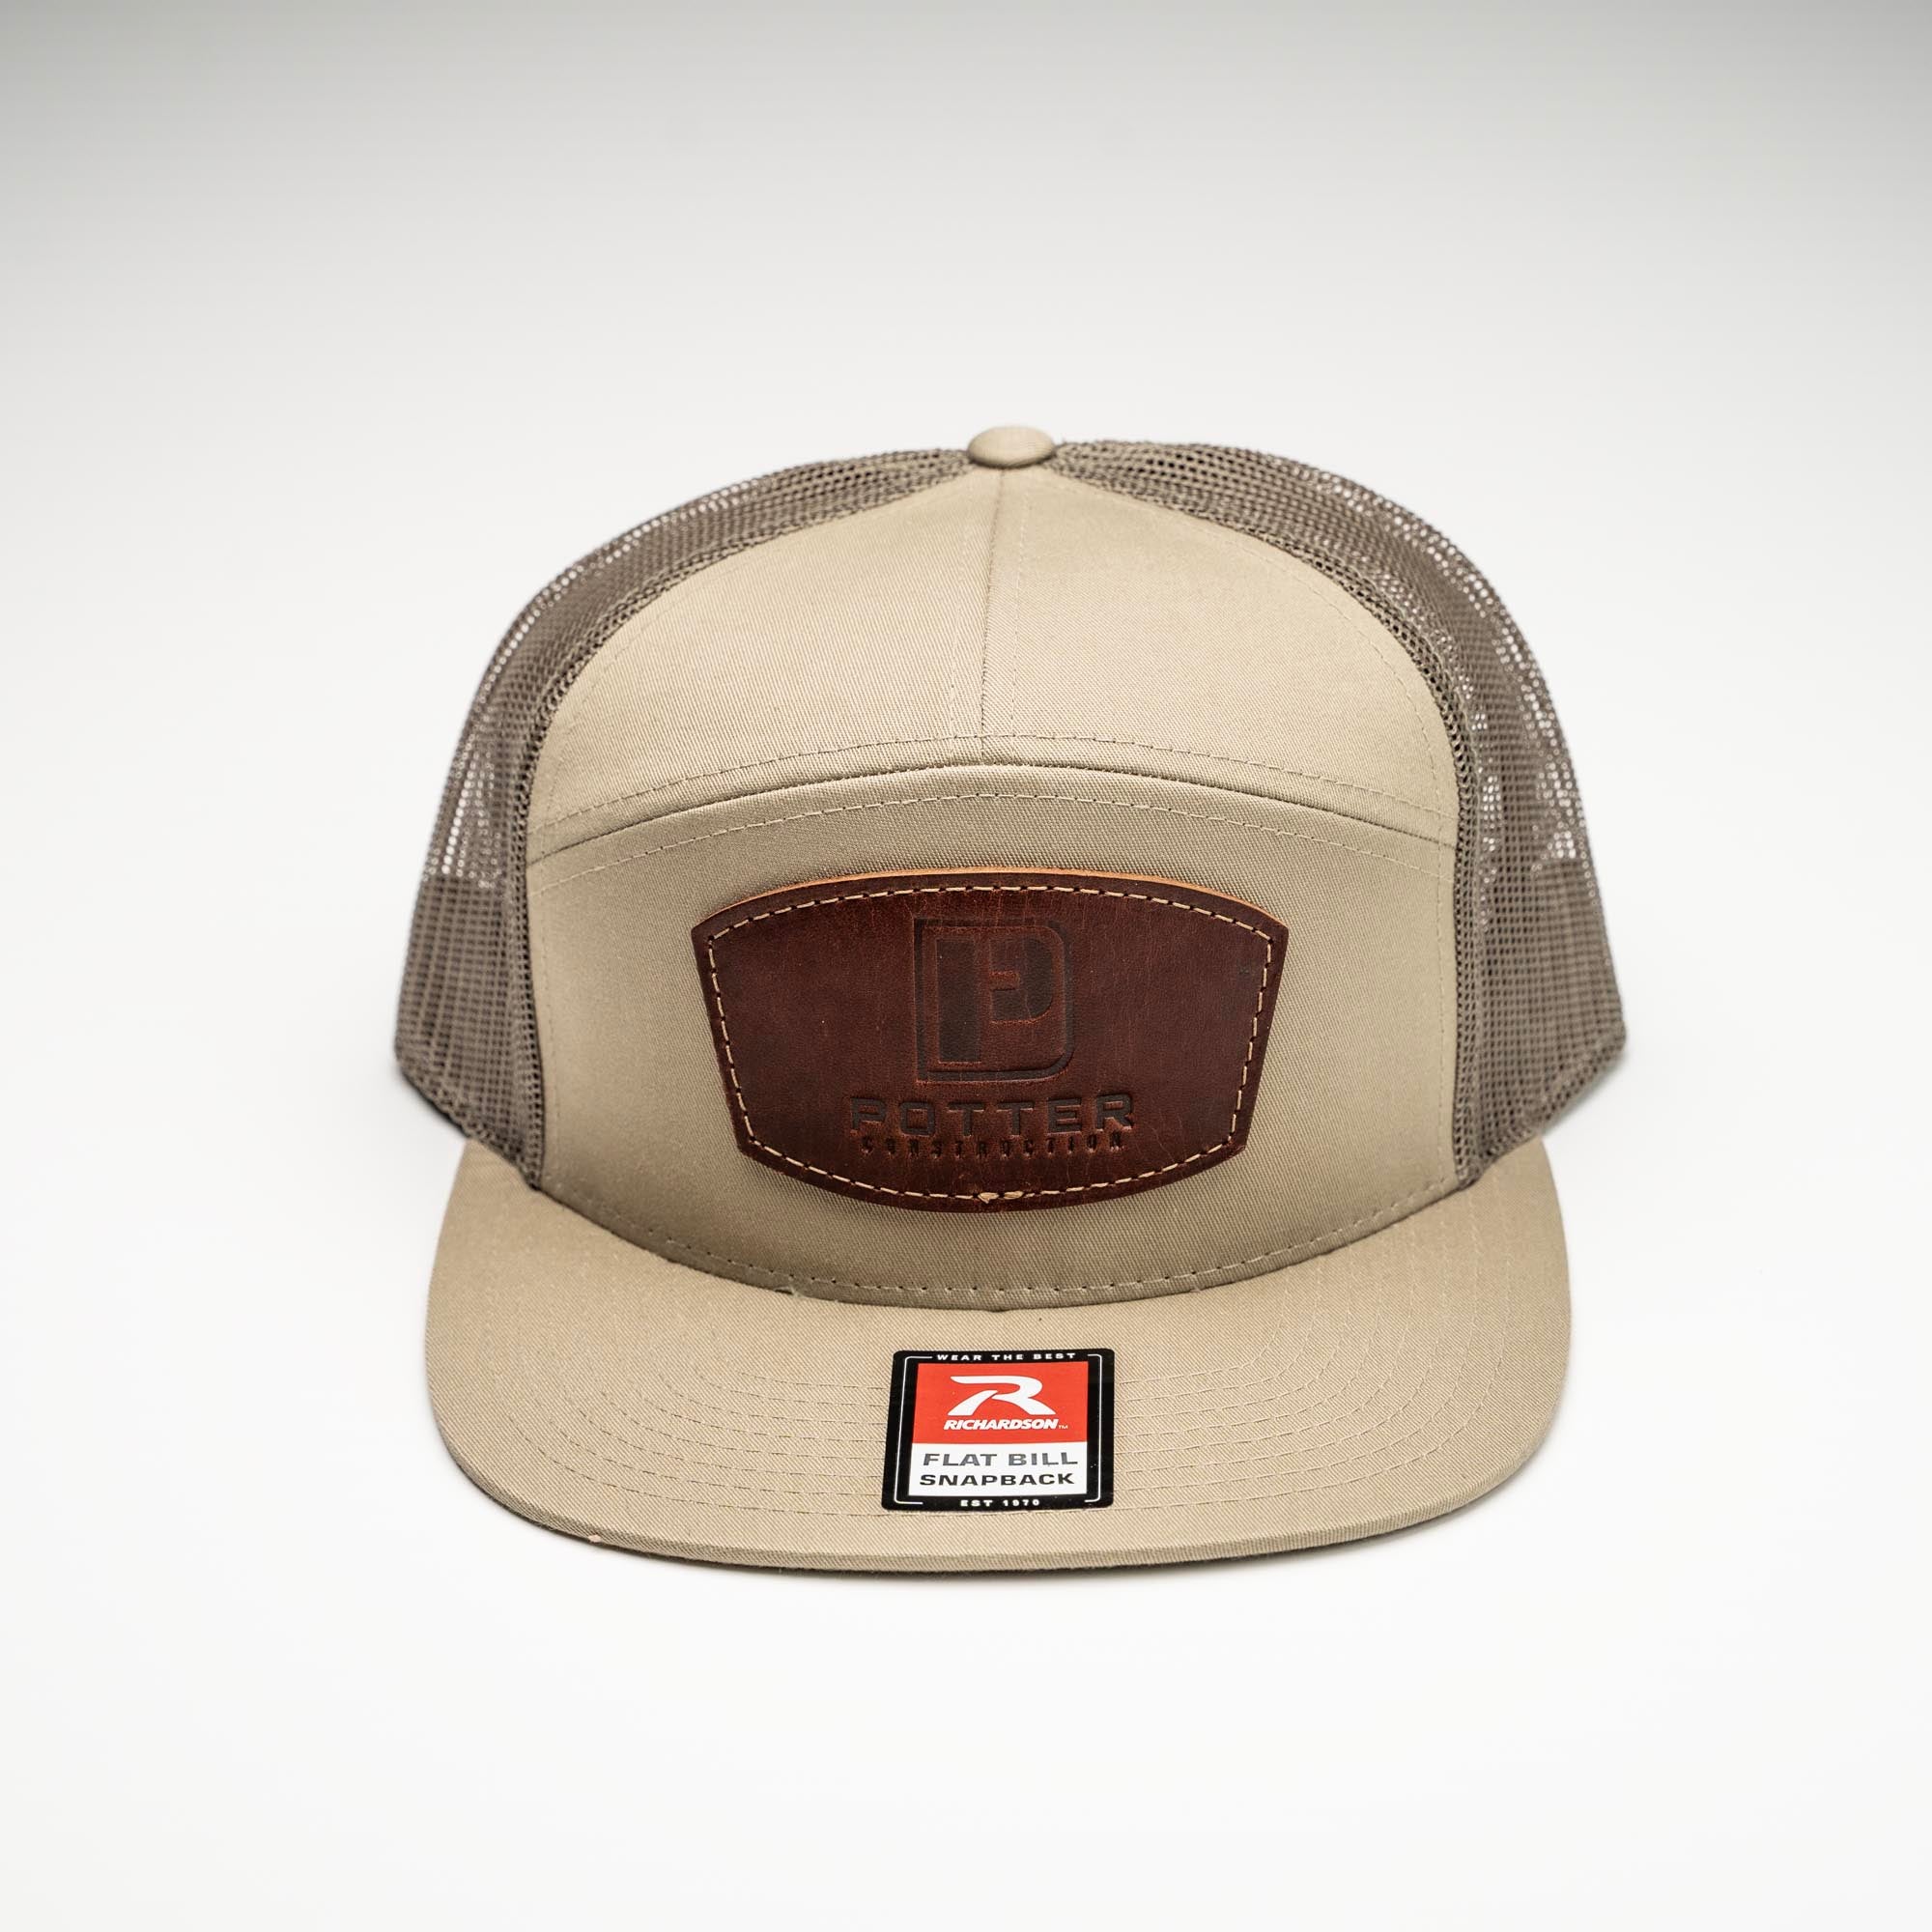 Debossed Leather Patch Trucker Flat Bill Hat ~ Richardson 168 7 Panel Trucker Hat ~ Customized with YOUR LOGO